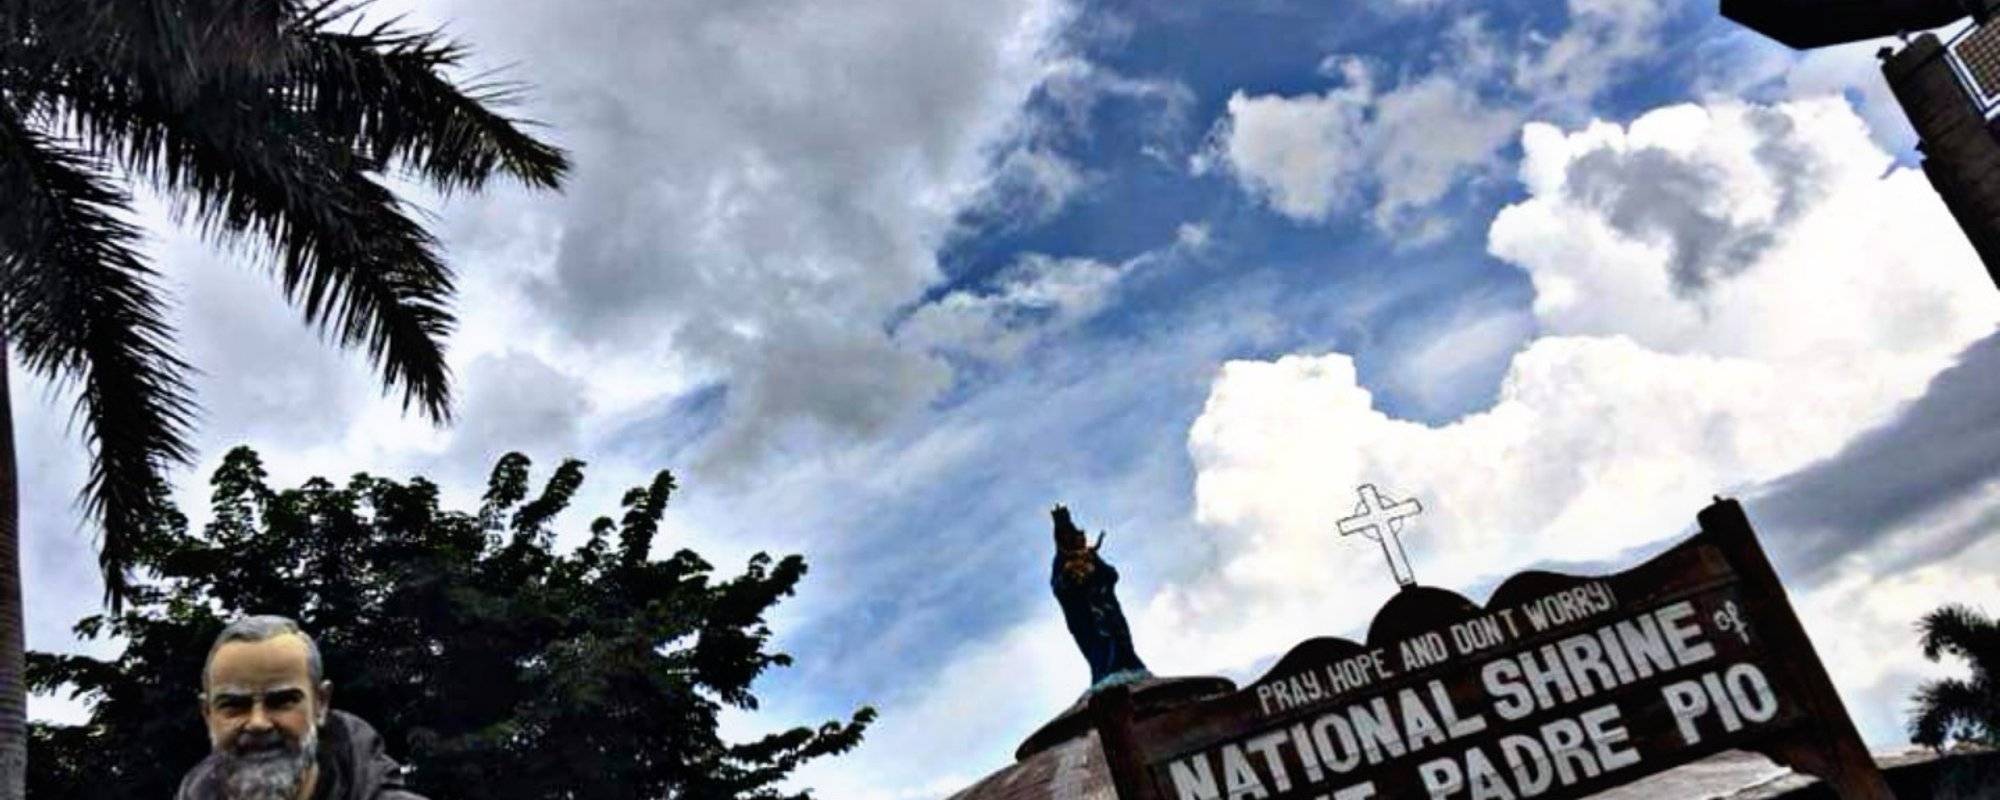 Weekend Travel Part 1 : National Shrine of St. Padre Pio